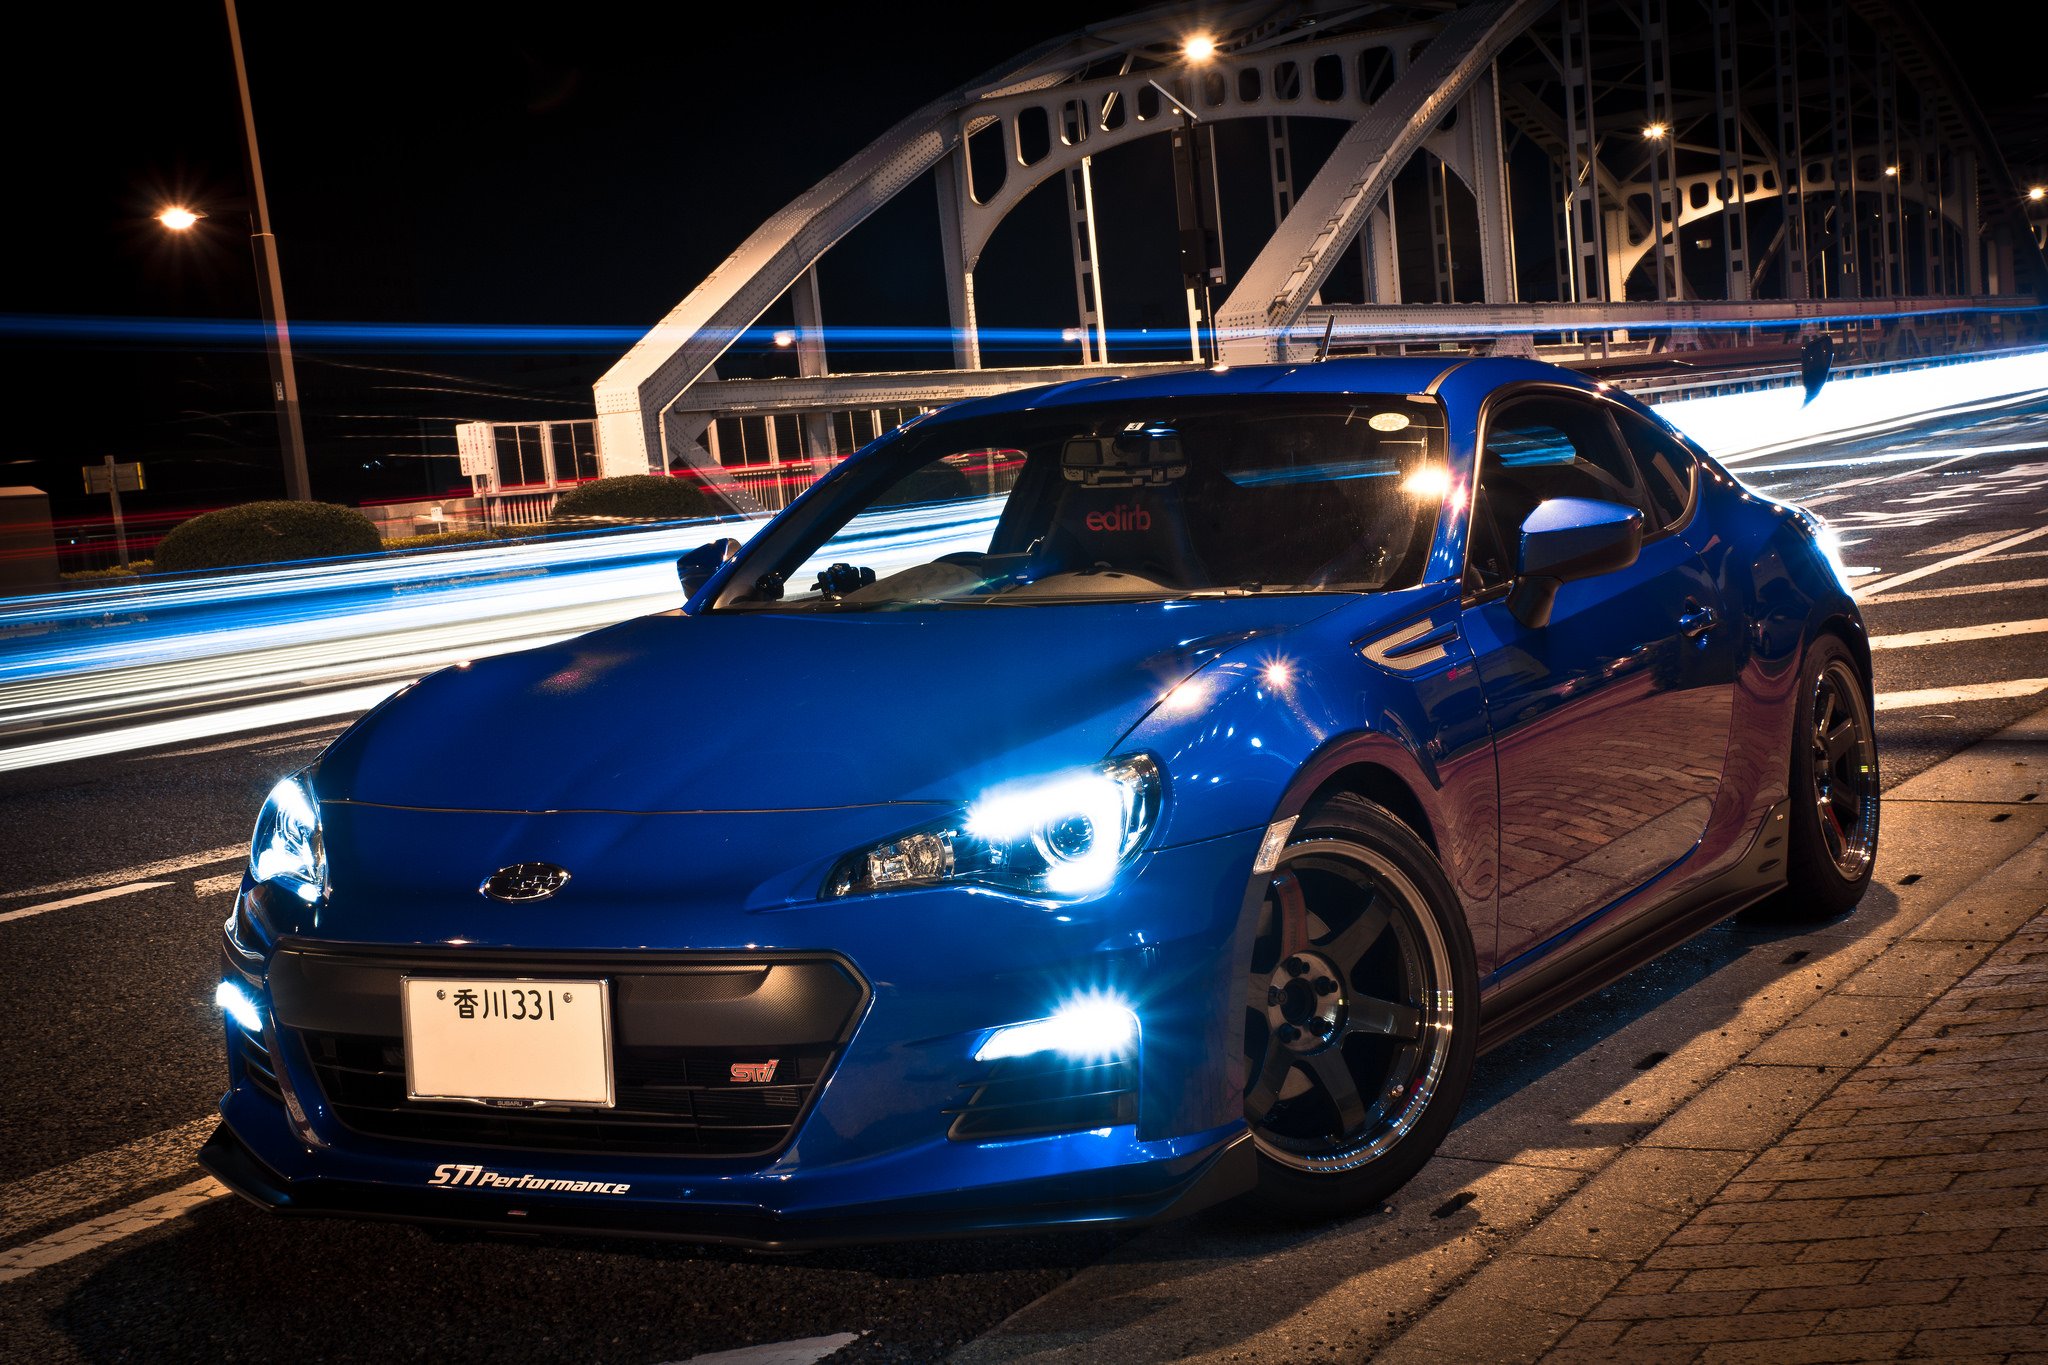 Toyota Gt86 Scion Frs Subaru Brz Coupe Tuning Cars Japan Wallpaper